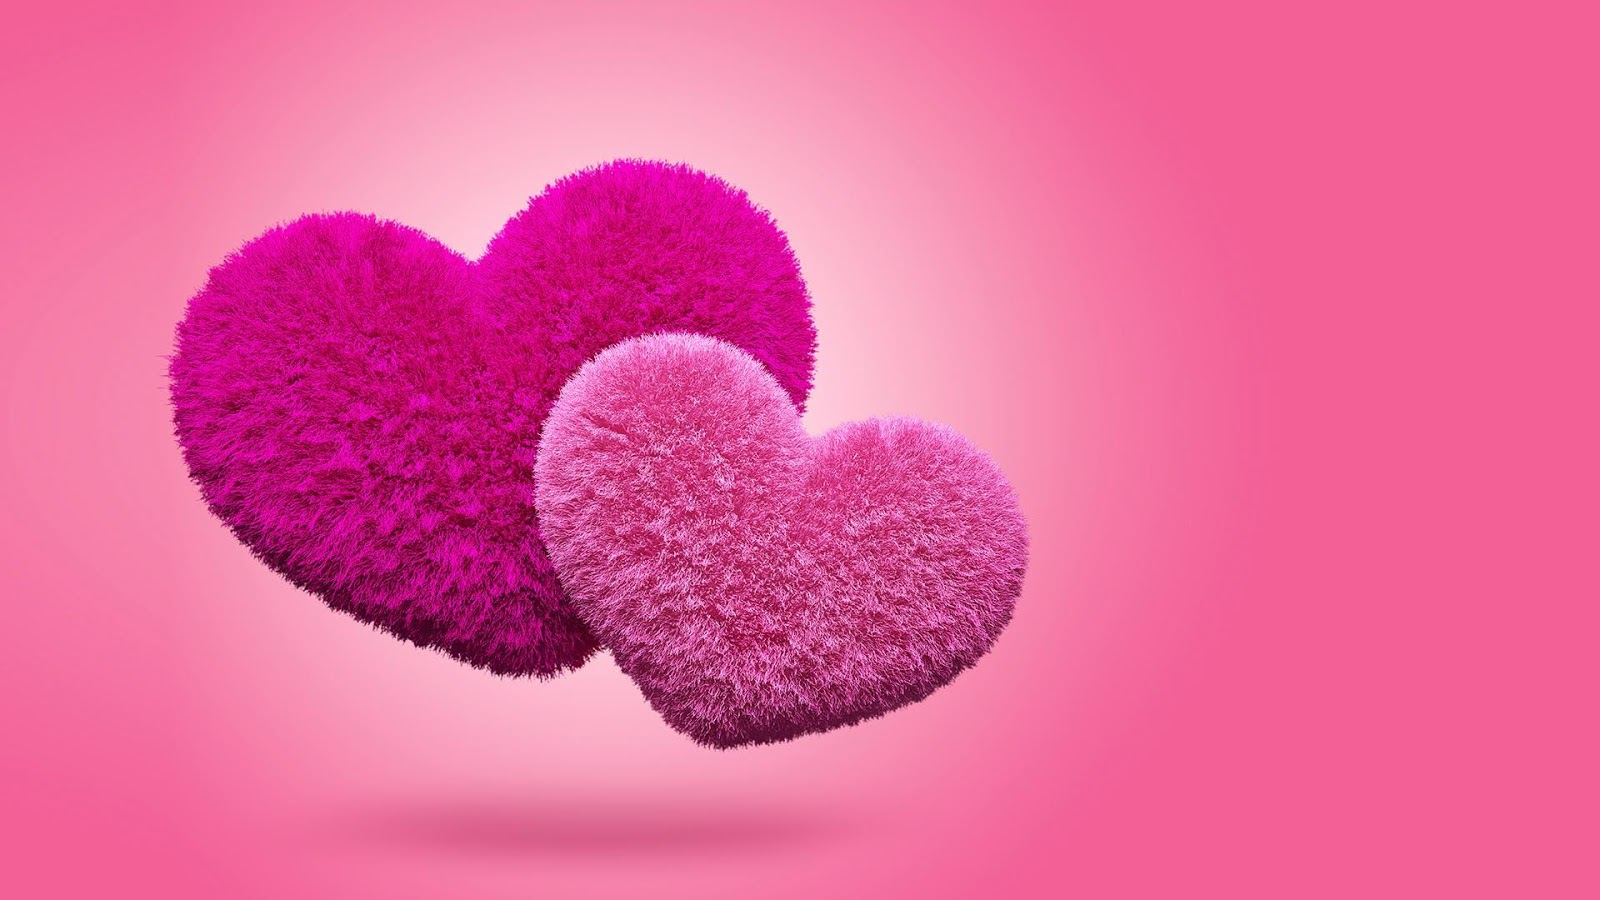 Hearts Live Wallpaper Offers You The Cutest Animated Background